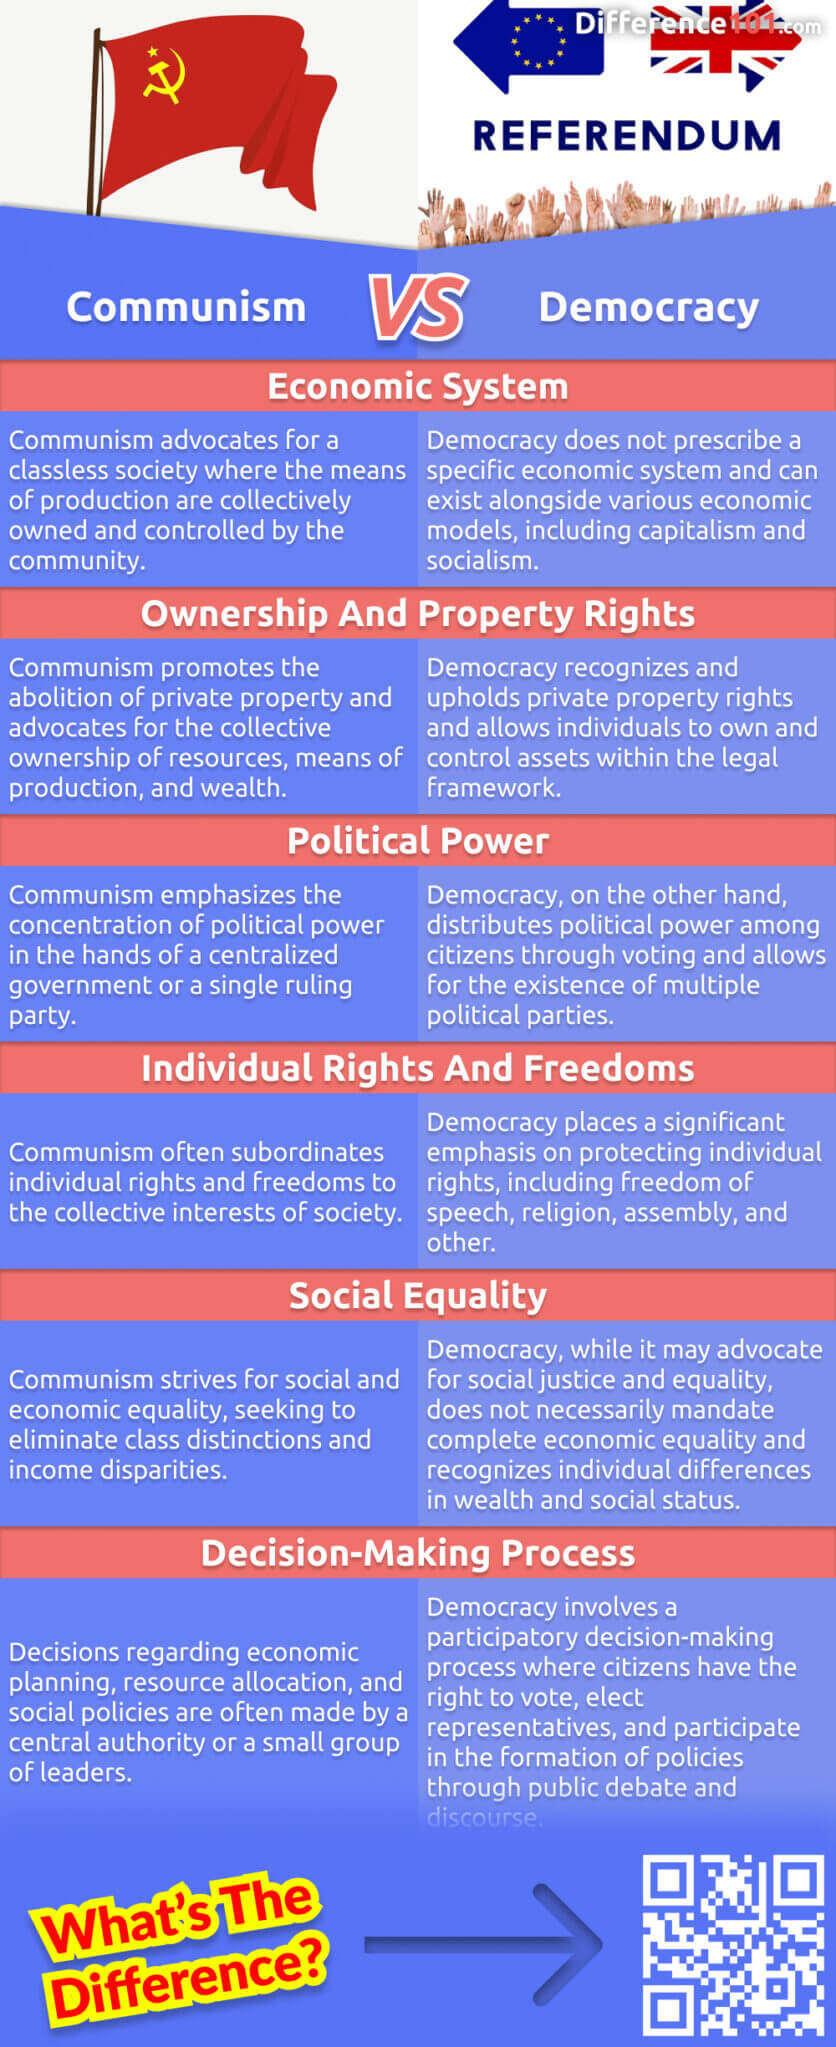 What's the difference between communism and democracy? This article will explain the key differences between the two political systems. Read more to learn about the pros and cons of each system.